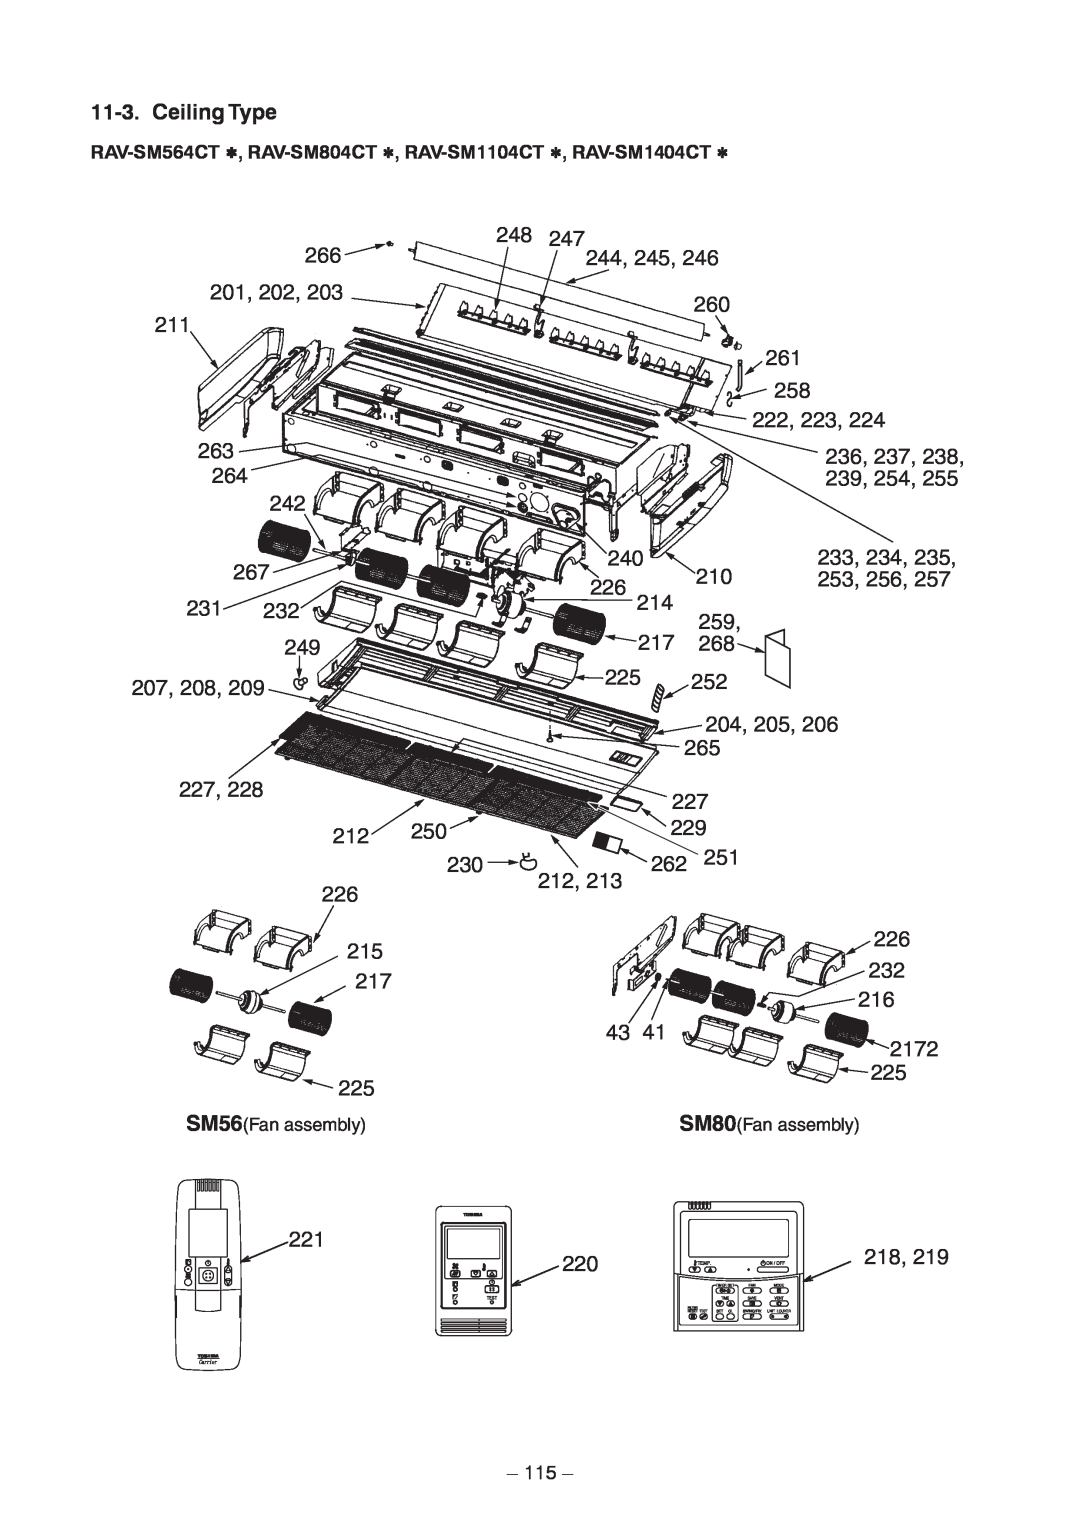 Toshiba CONCEALED DUCK TYPE, CEILING TYPE service manual Ceiling Type 